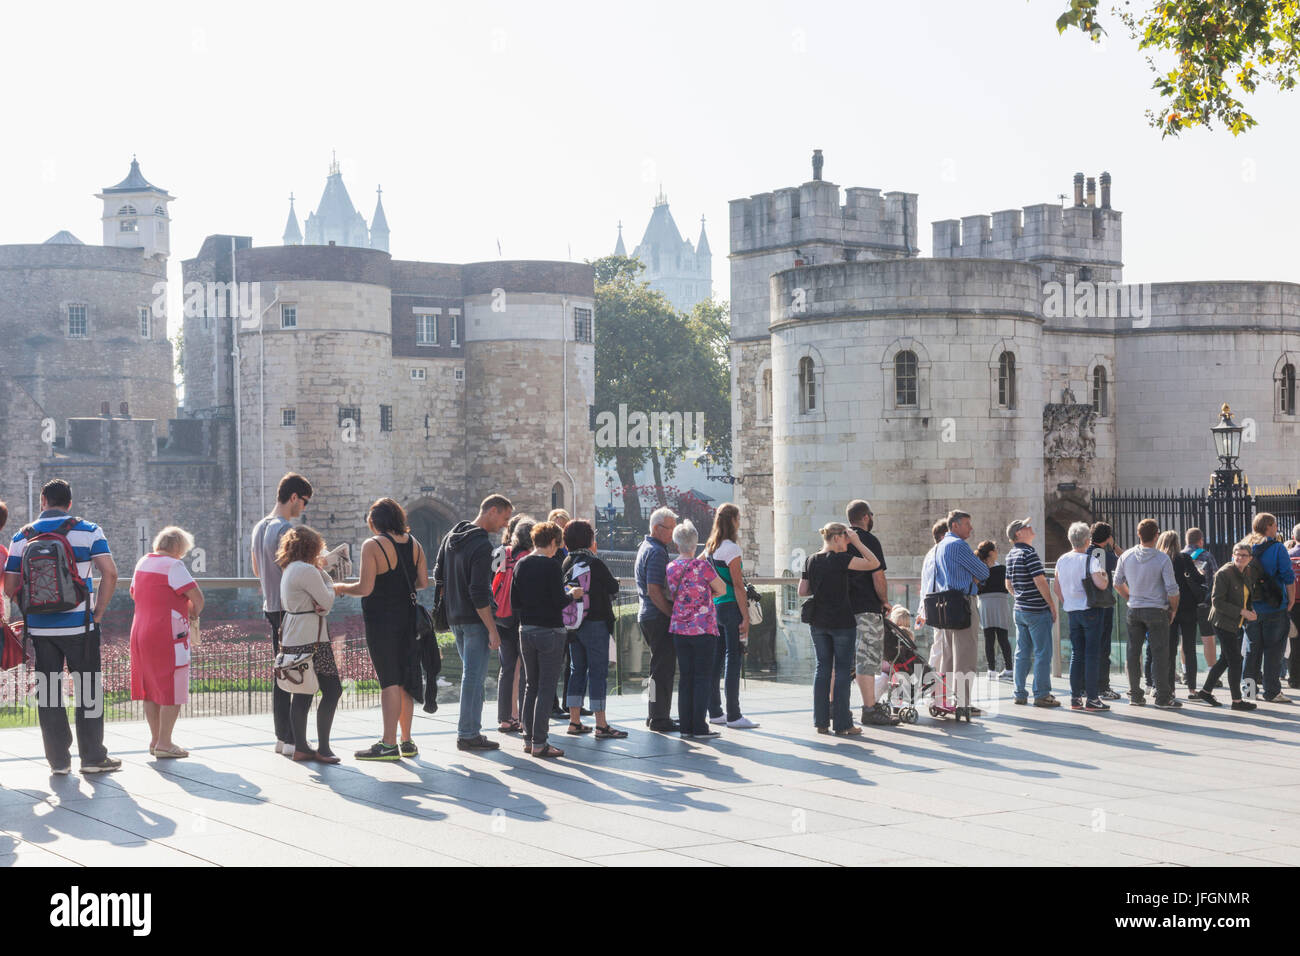 England, London, Tower of London, Tourists Queuing Stock Photo